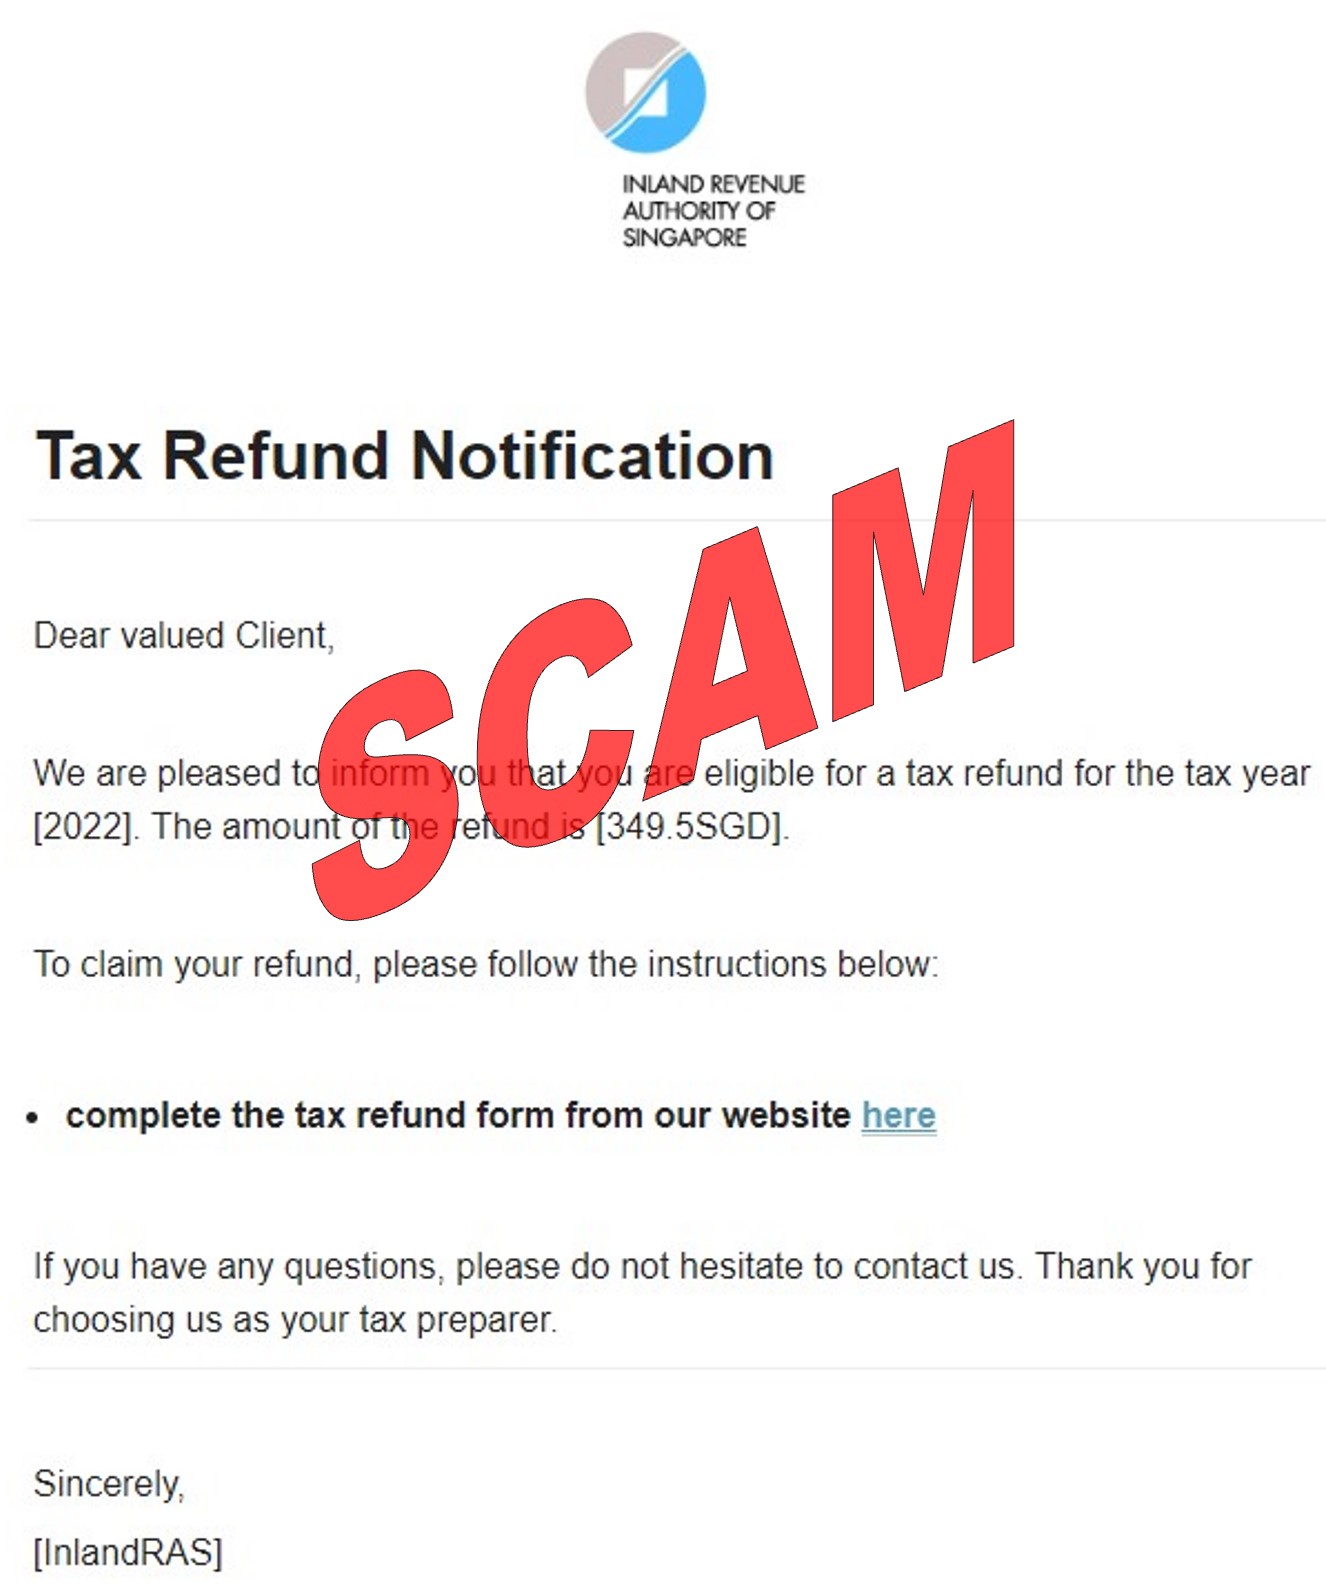 Screenshot of scam phishing emails under the pretext of offering “tax refunds” to lure taxpayers in giving their credit card details